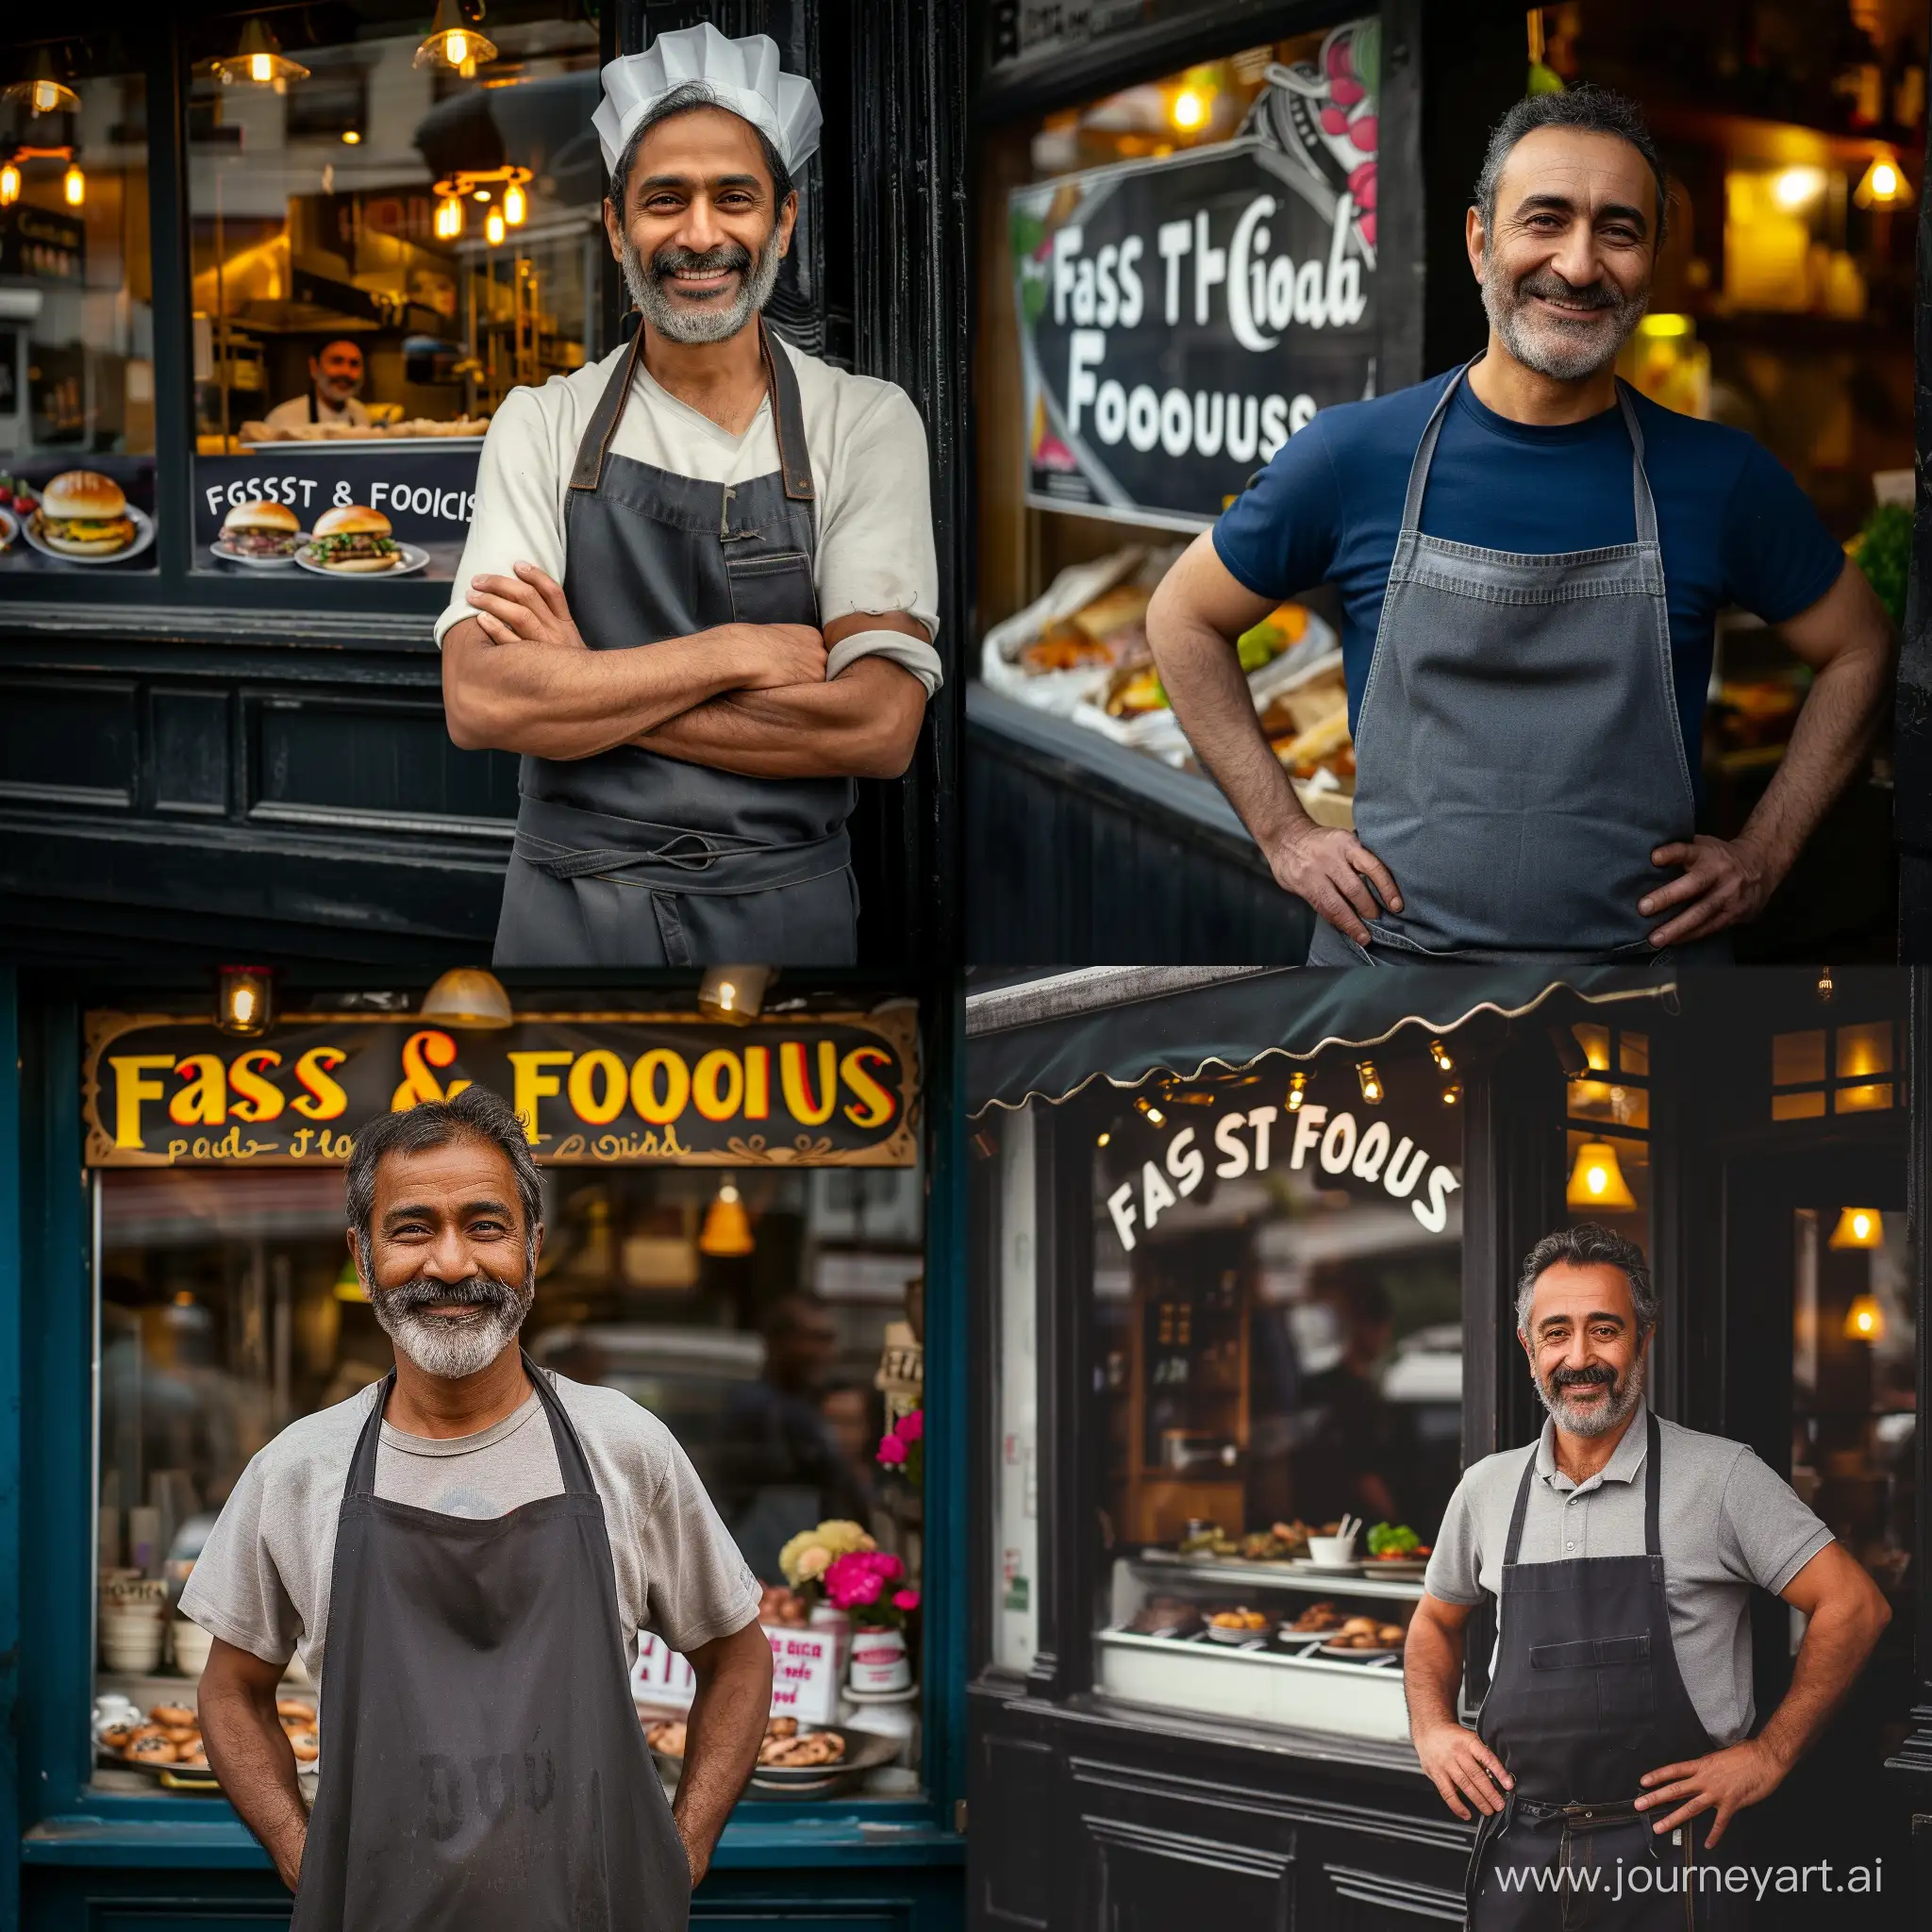 Restaurant-Owner-of-Fast-and-Foodious-Standing-Proudly-Outside-His-Establishment